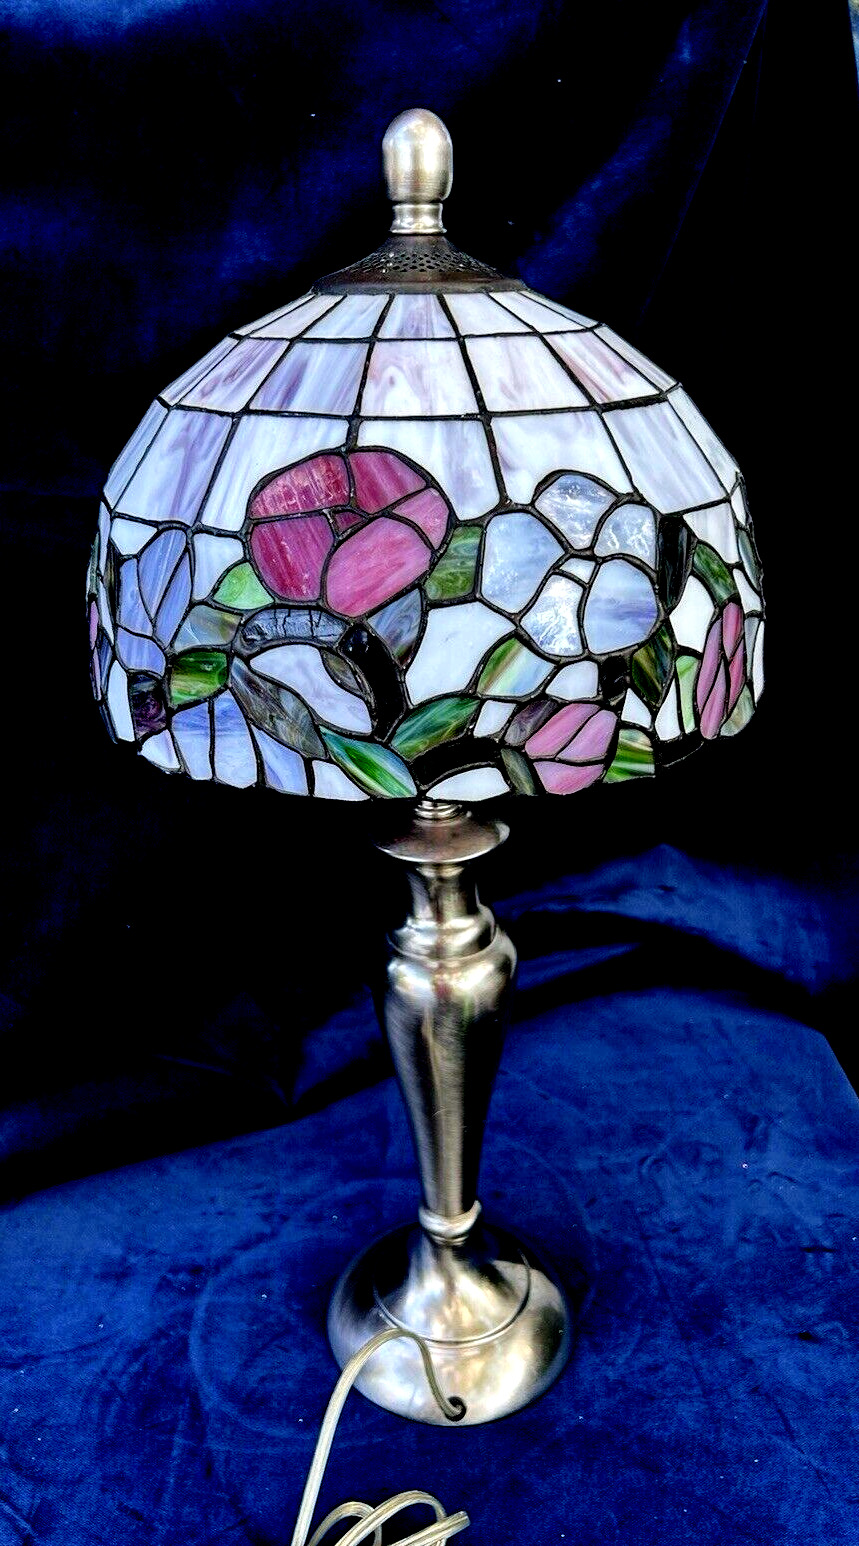 Tiffany styled Stained Glass Lamp Flowers 26” tall Vintage